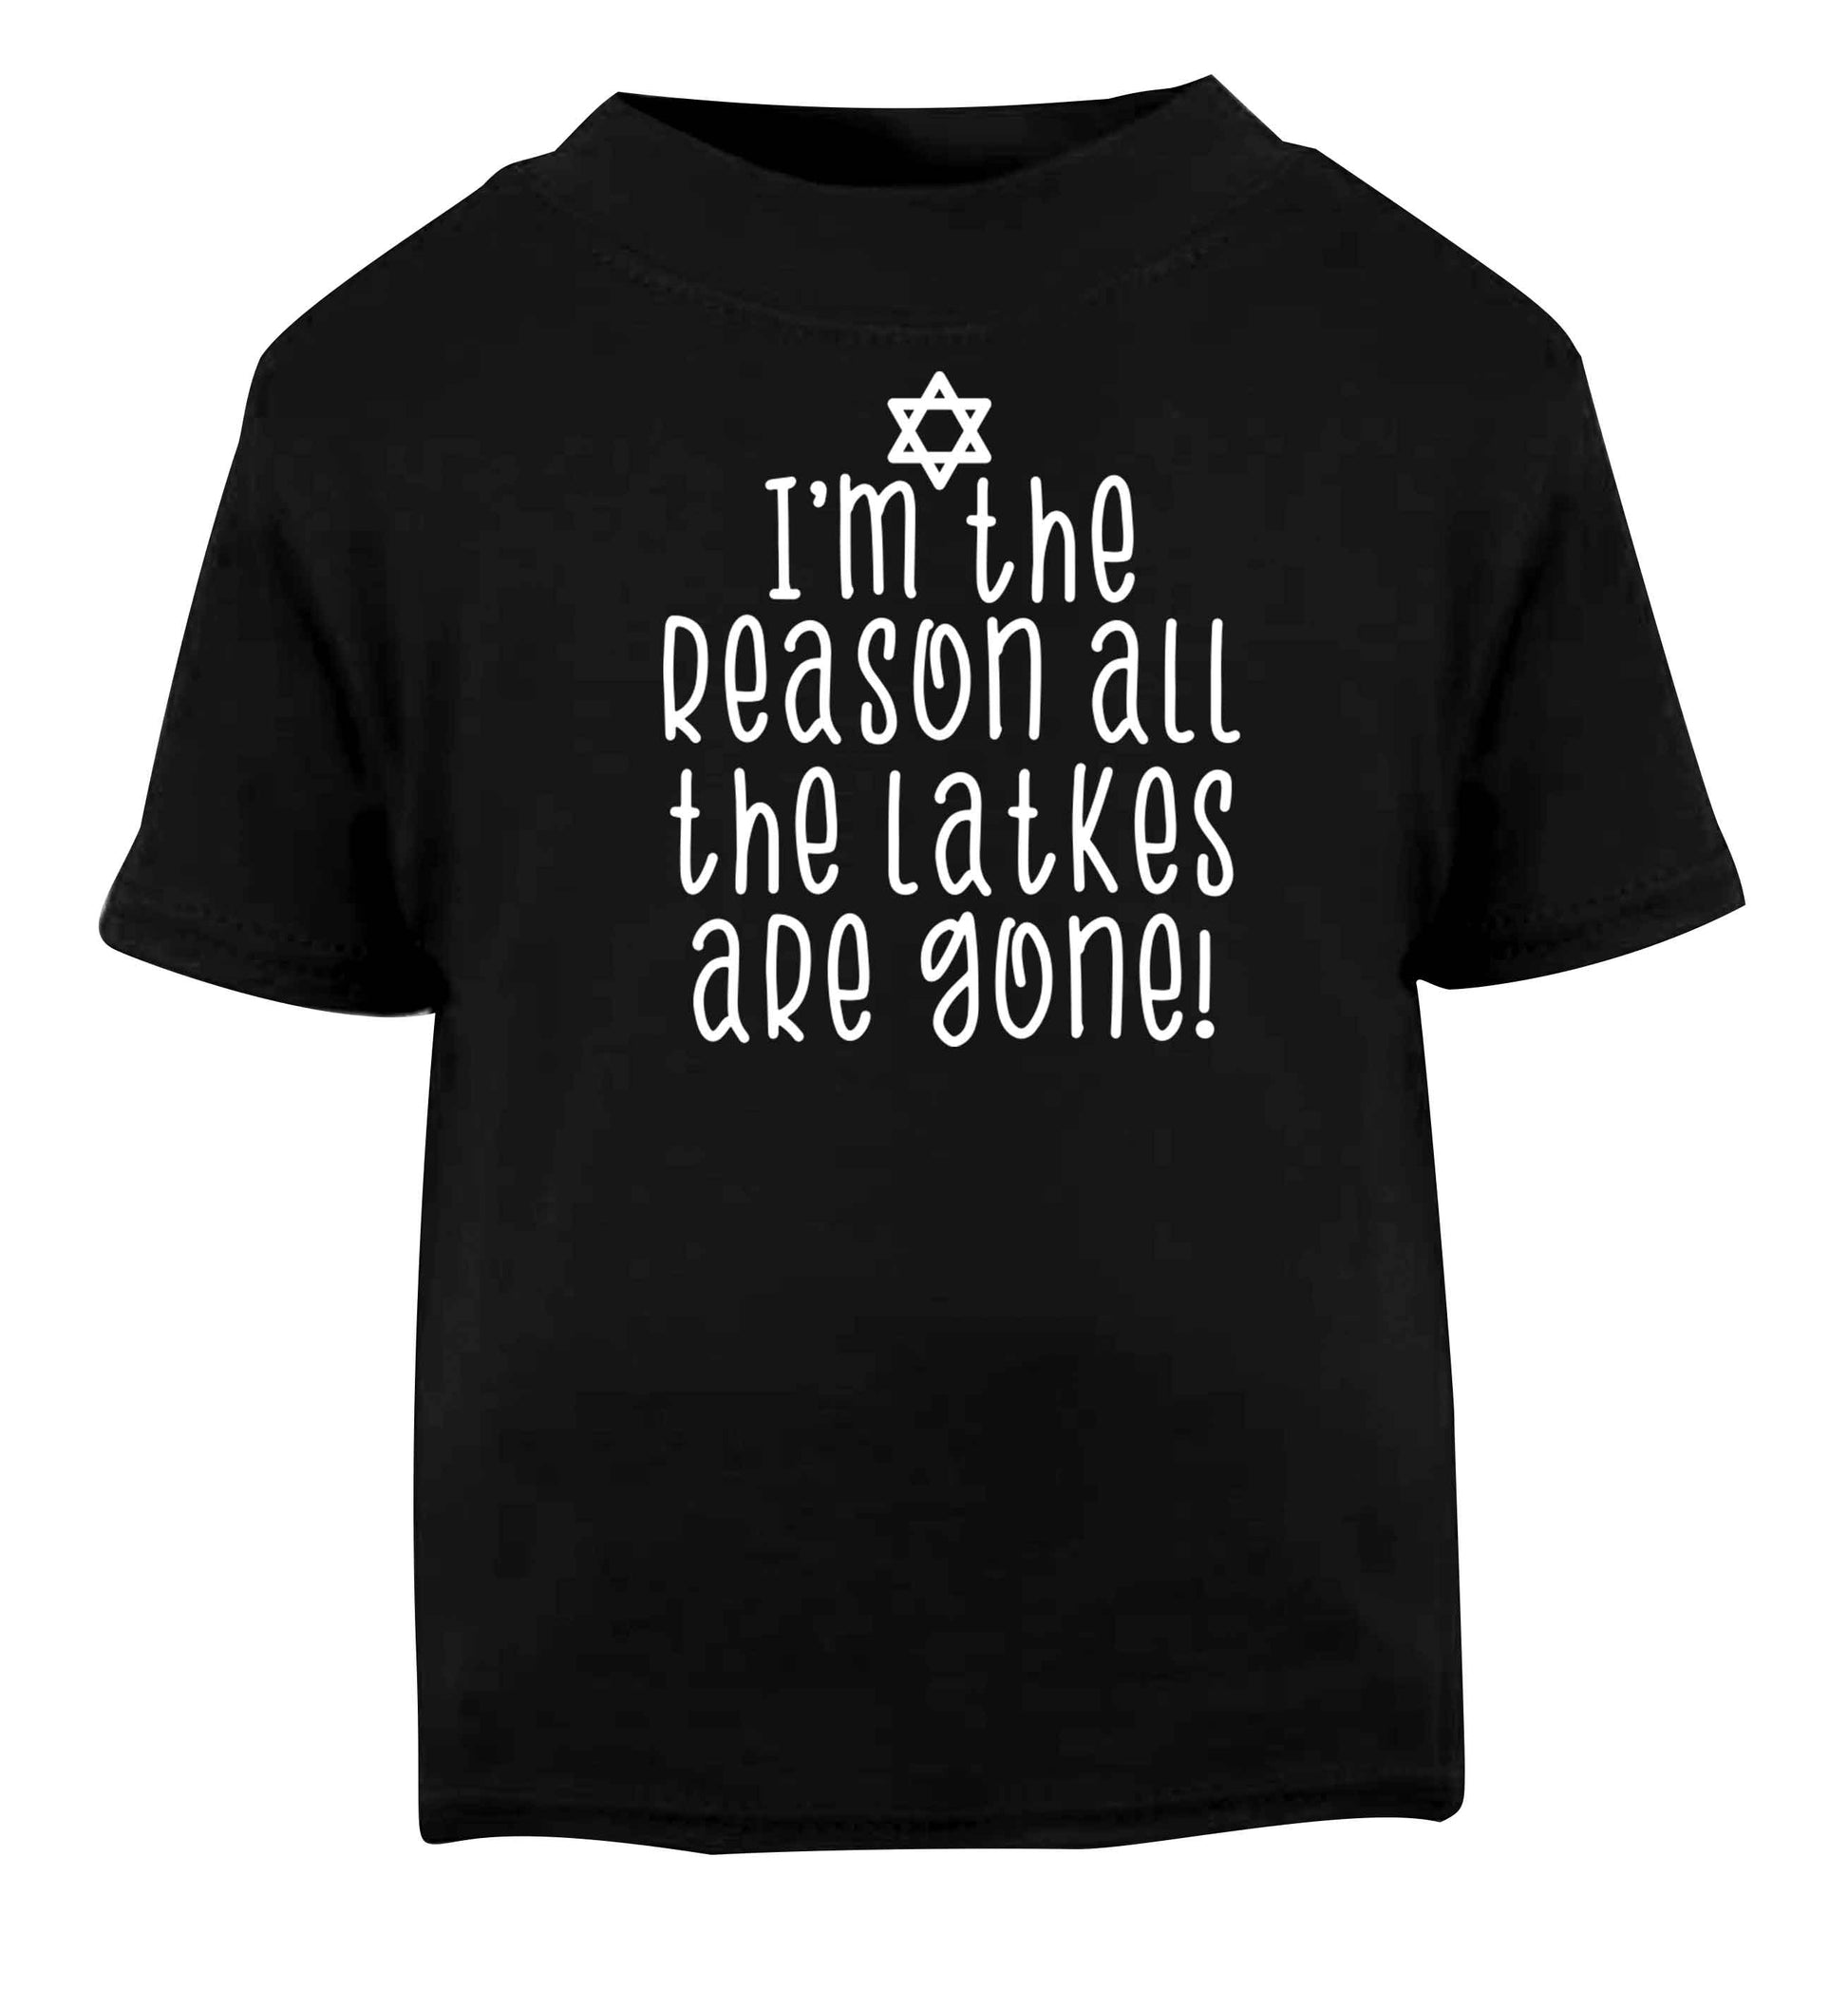 I'm the reason all the latkes are gone Black baby toddler Tshirt 2 years